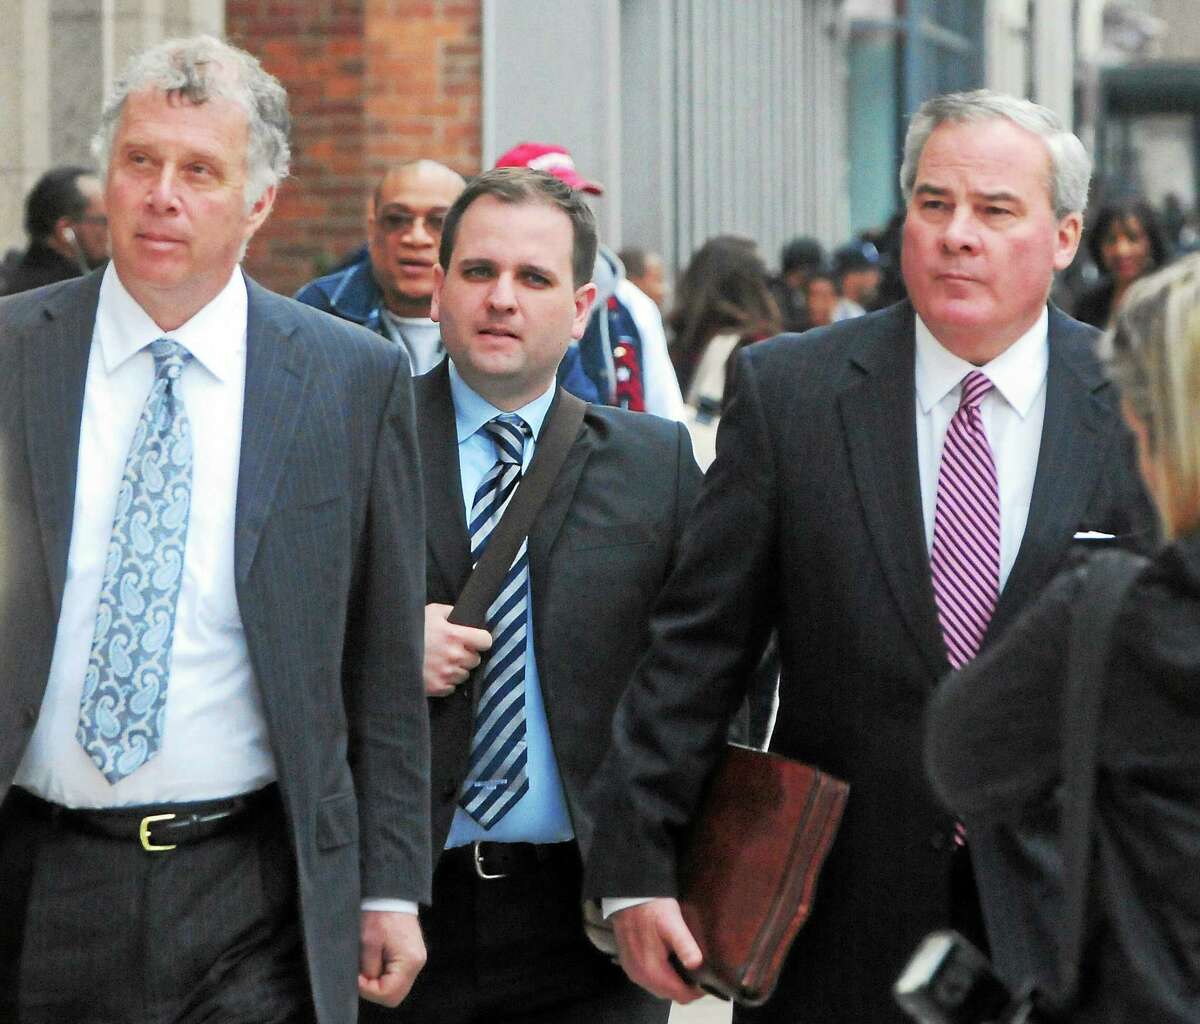 Former Connecticut Governor John G. Rowland, right, arrives with his attorney Reid Weingarten, far left, at the Federal Courthouse in New Haven in 2014.